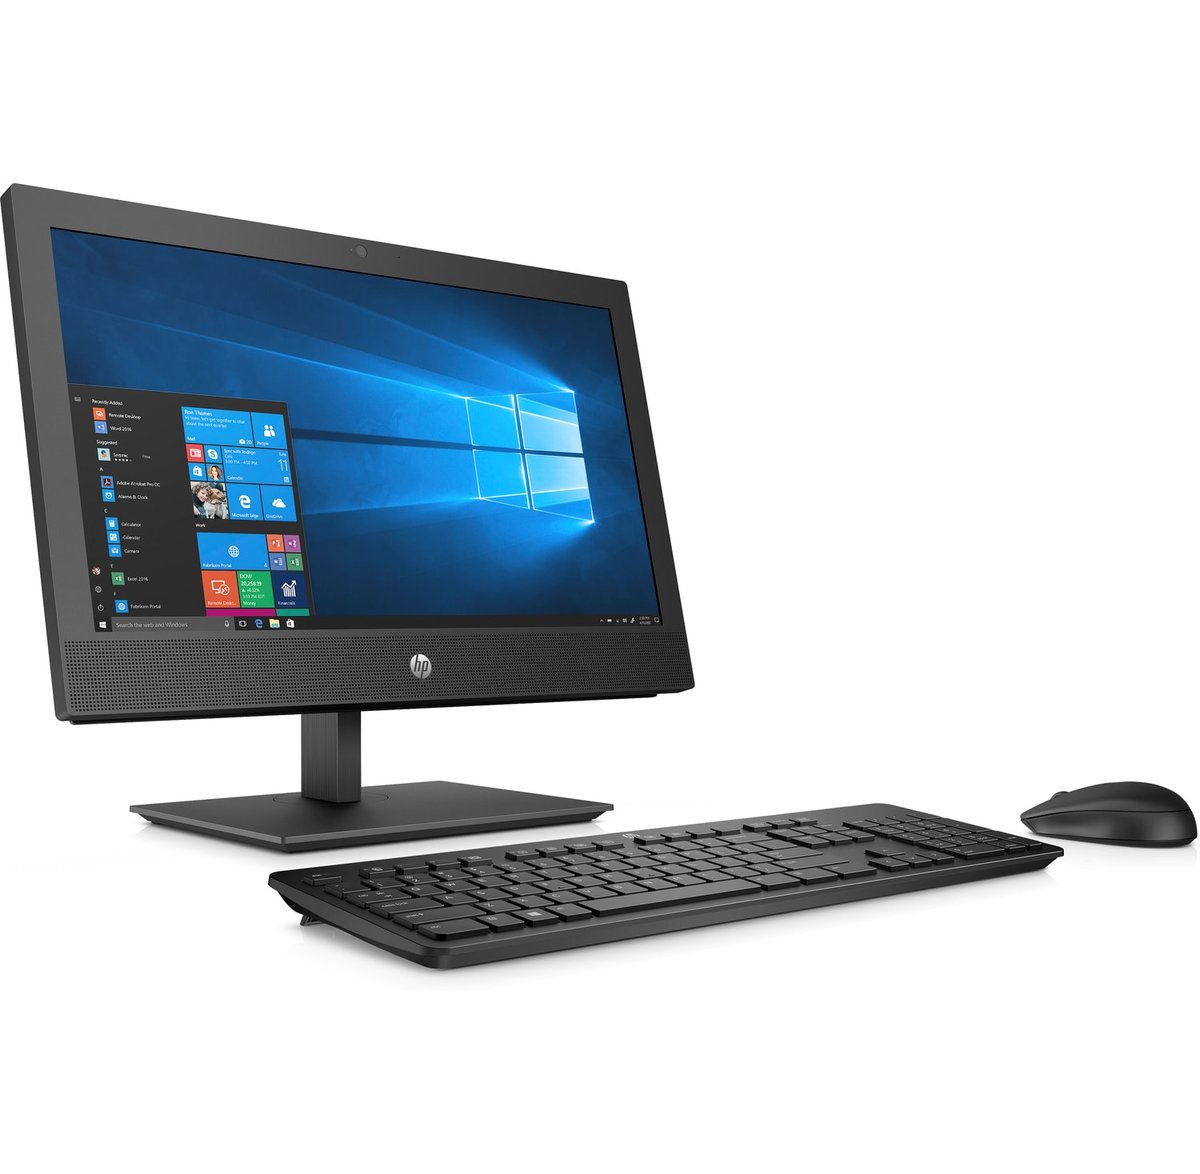 HP ProOne 400 G4 All-in-One NT